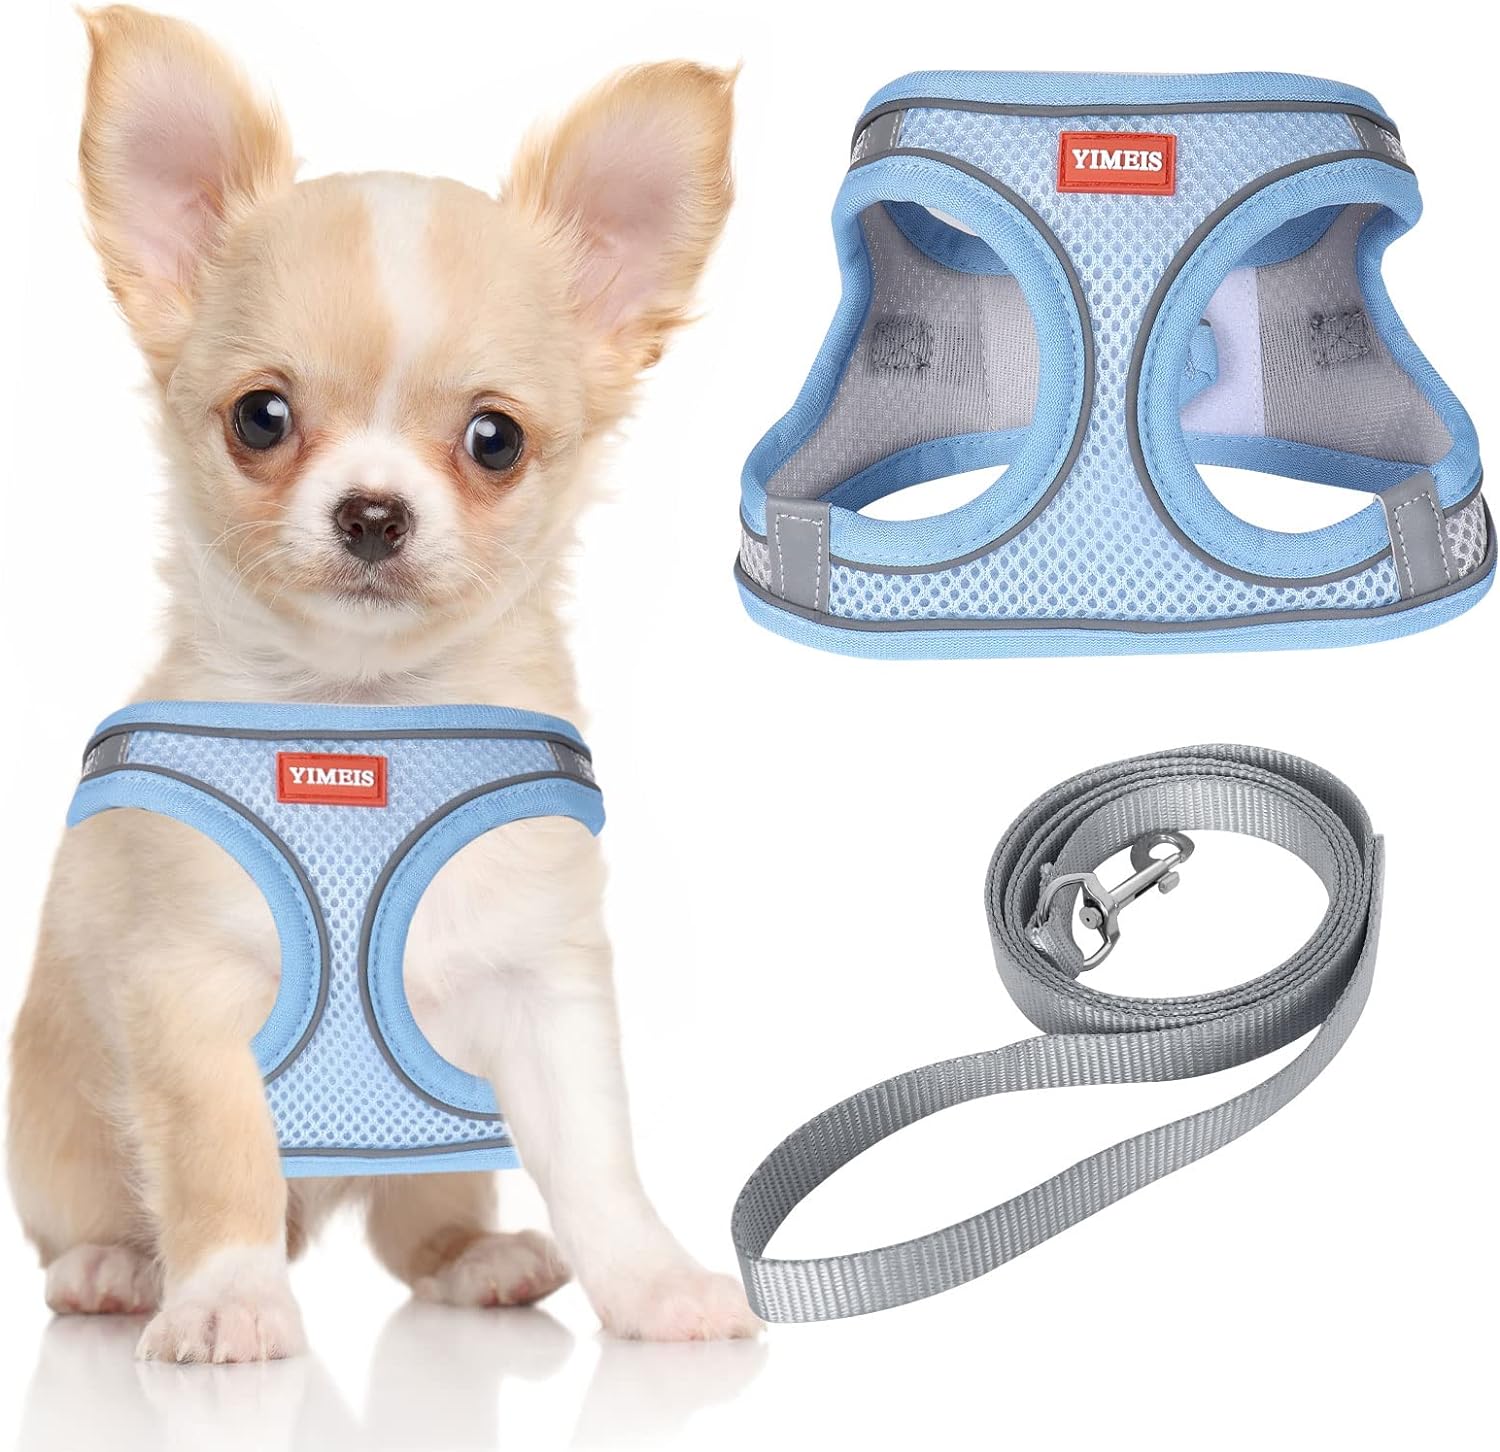 YIMEIS Dog Harness and Leash Set, No Pull Soft Mesh Pet Harness, Reflective Adjustable Puppy Vest for Small Medium Large Dogs, Cats (Greyblue, Medium (Pack of 1)